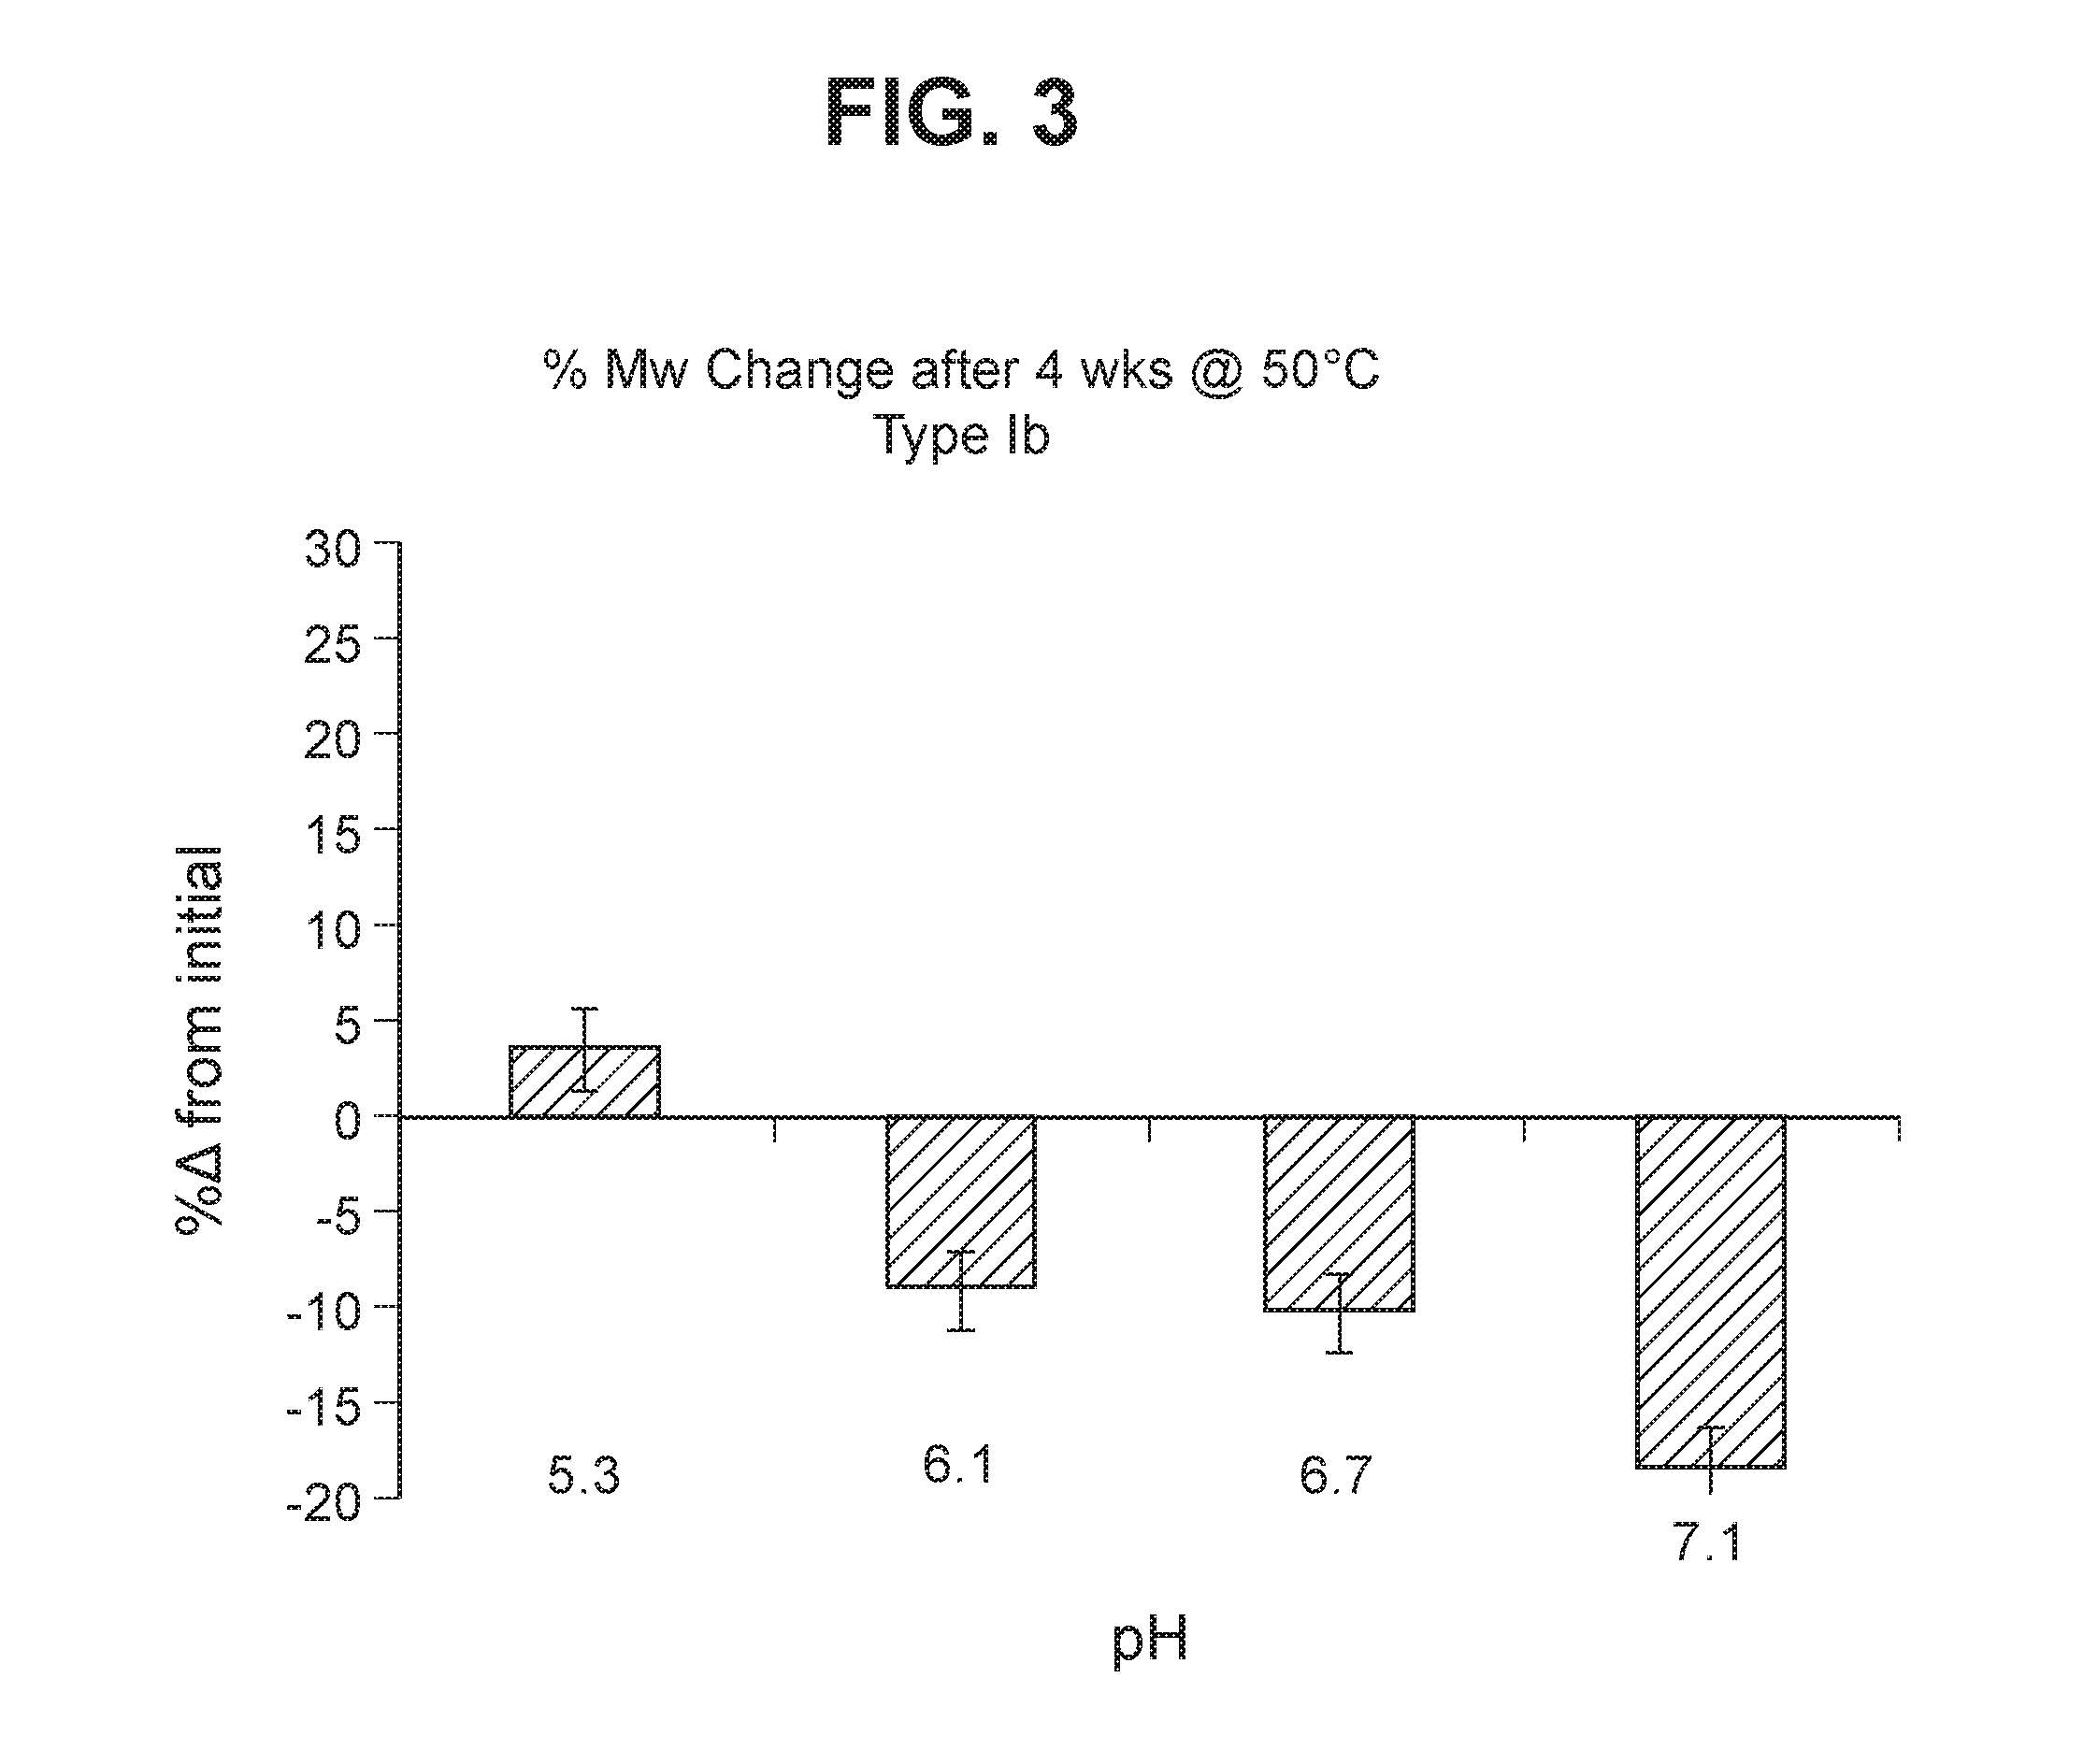 Group b streptococcus polysaccharide-protein conjugates, methods for producing conjugates, immunogenic compositions comprising conjugates, and uses thereof